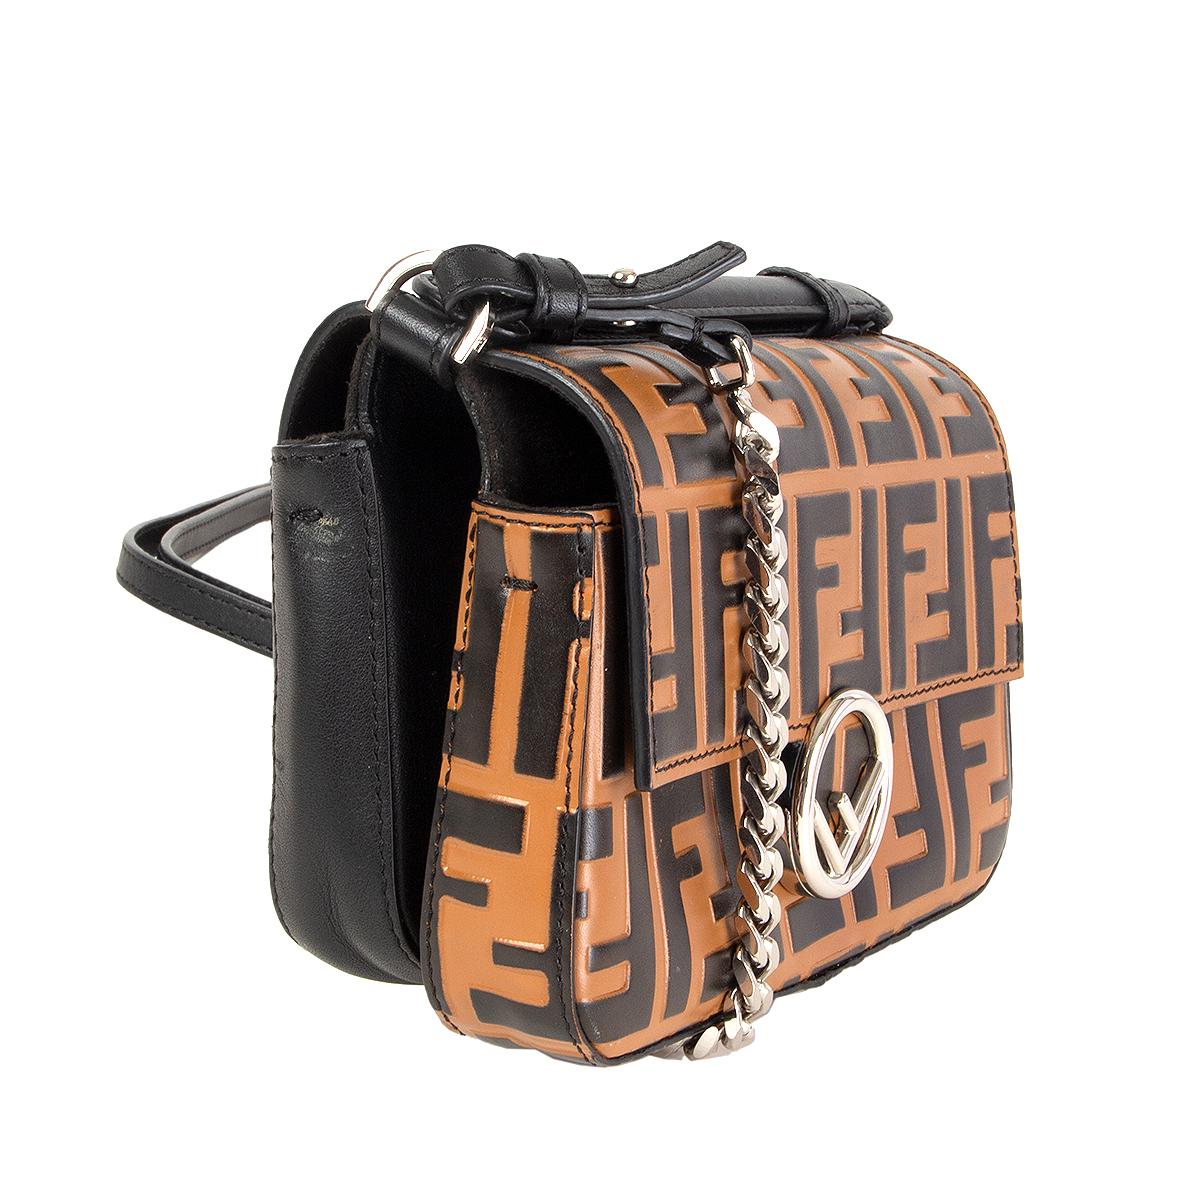 100% authentic Fendi 'Double Logo Micro Baguette' shoulder body bag in brown and black Zucca embossed leather and black calfskin featuring a double foldover top with magnetic snap closure, a front logo plaque, a chain strap. Two main internal